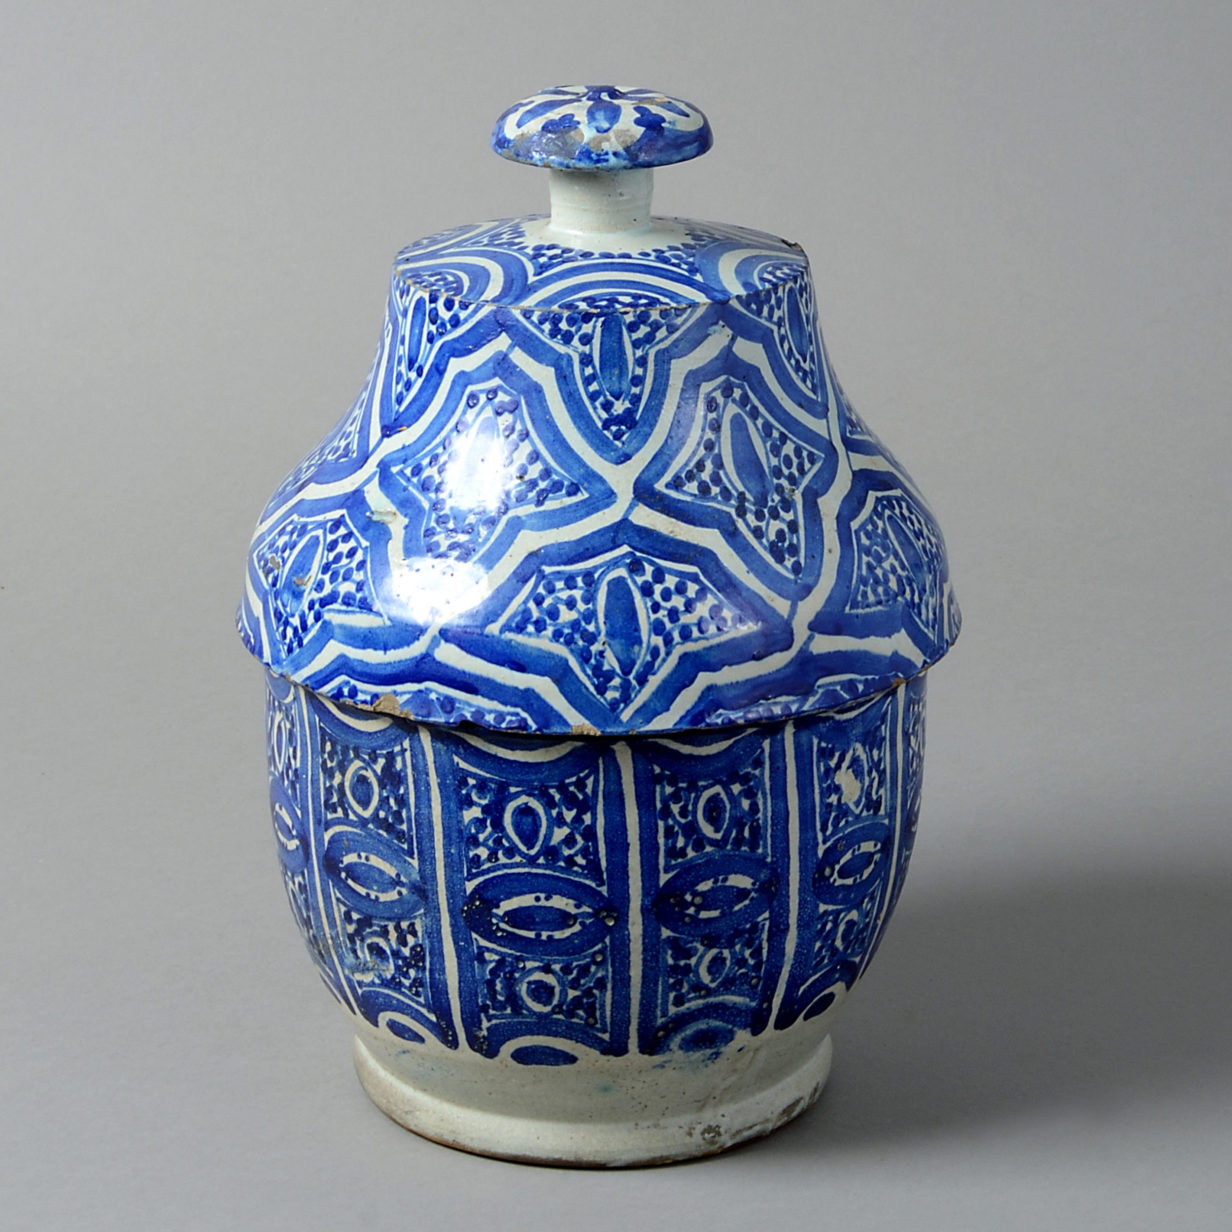 A 19th century moorish couscous pot and cover